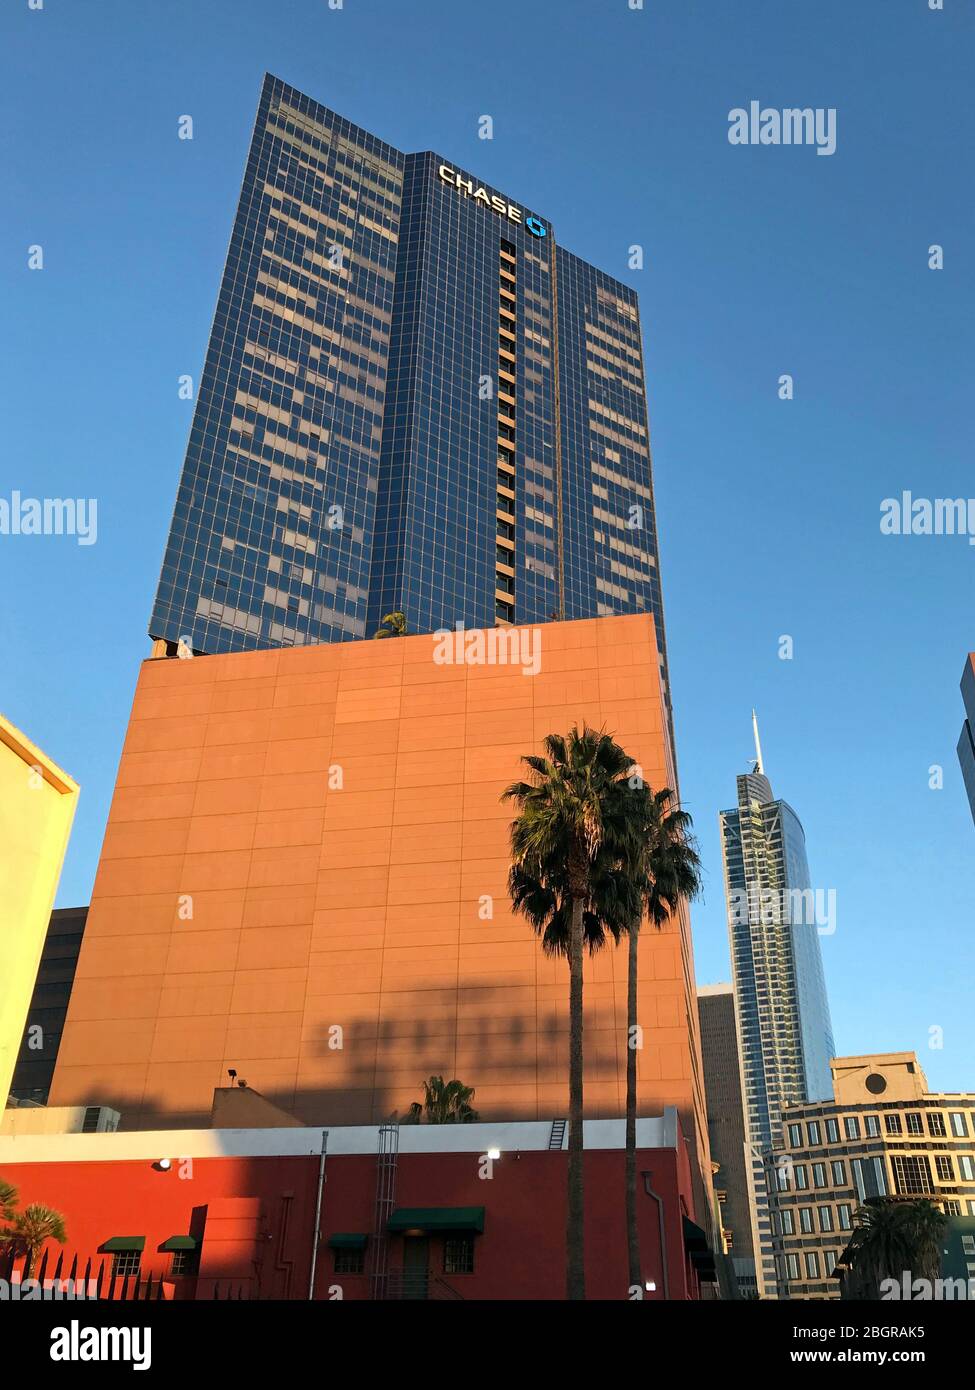 Chase Bank in downtown Los Angeles, CA Stock Photo